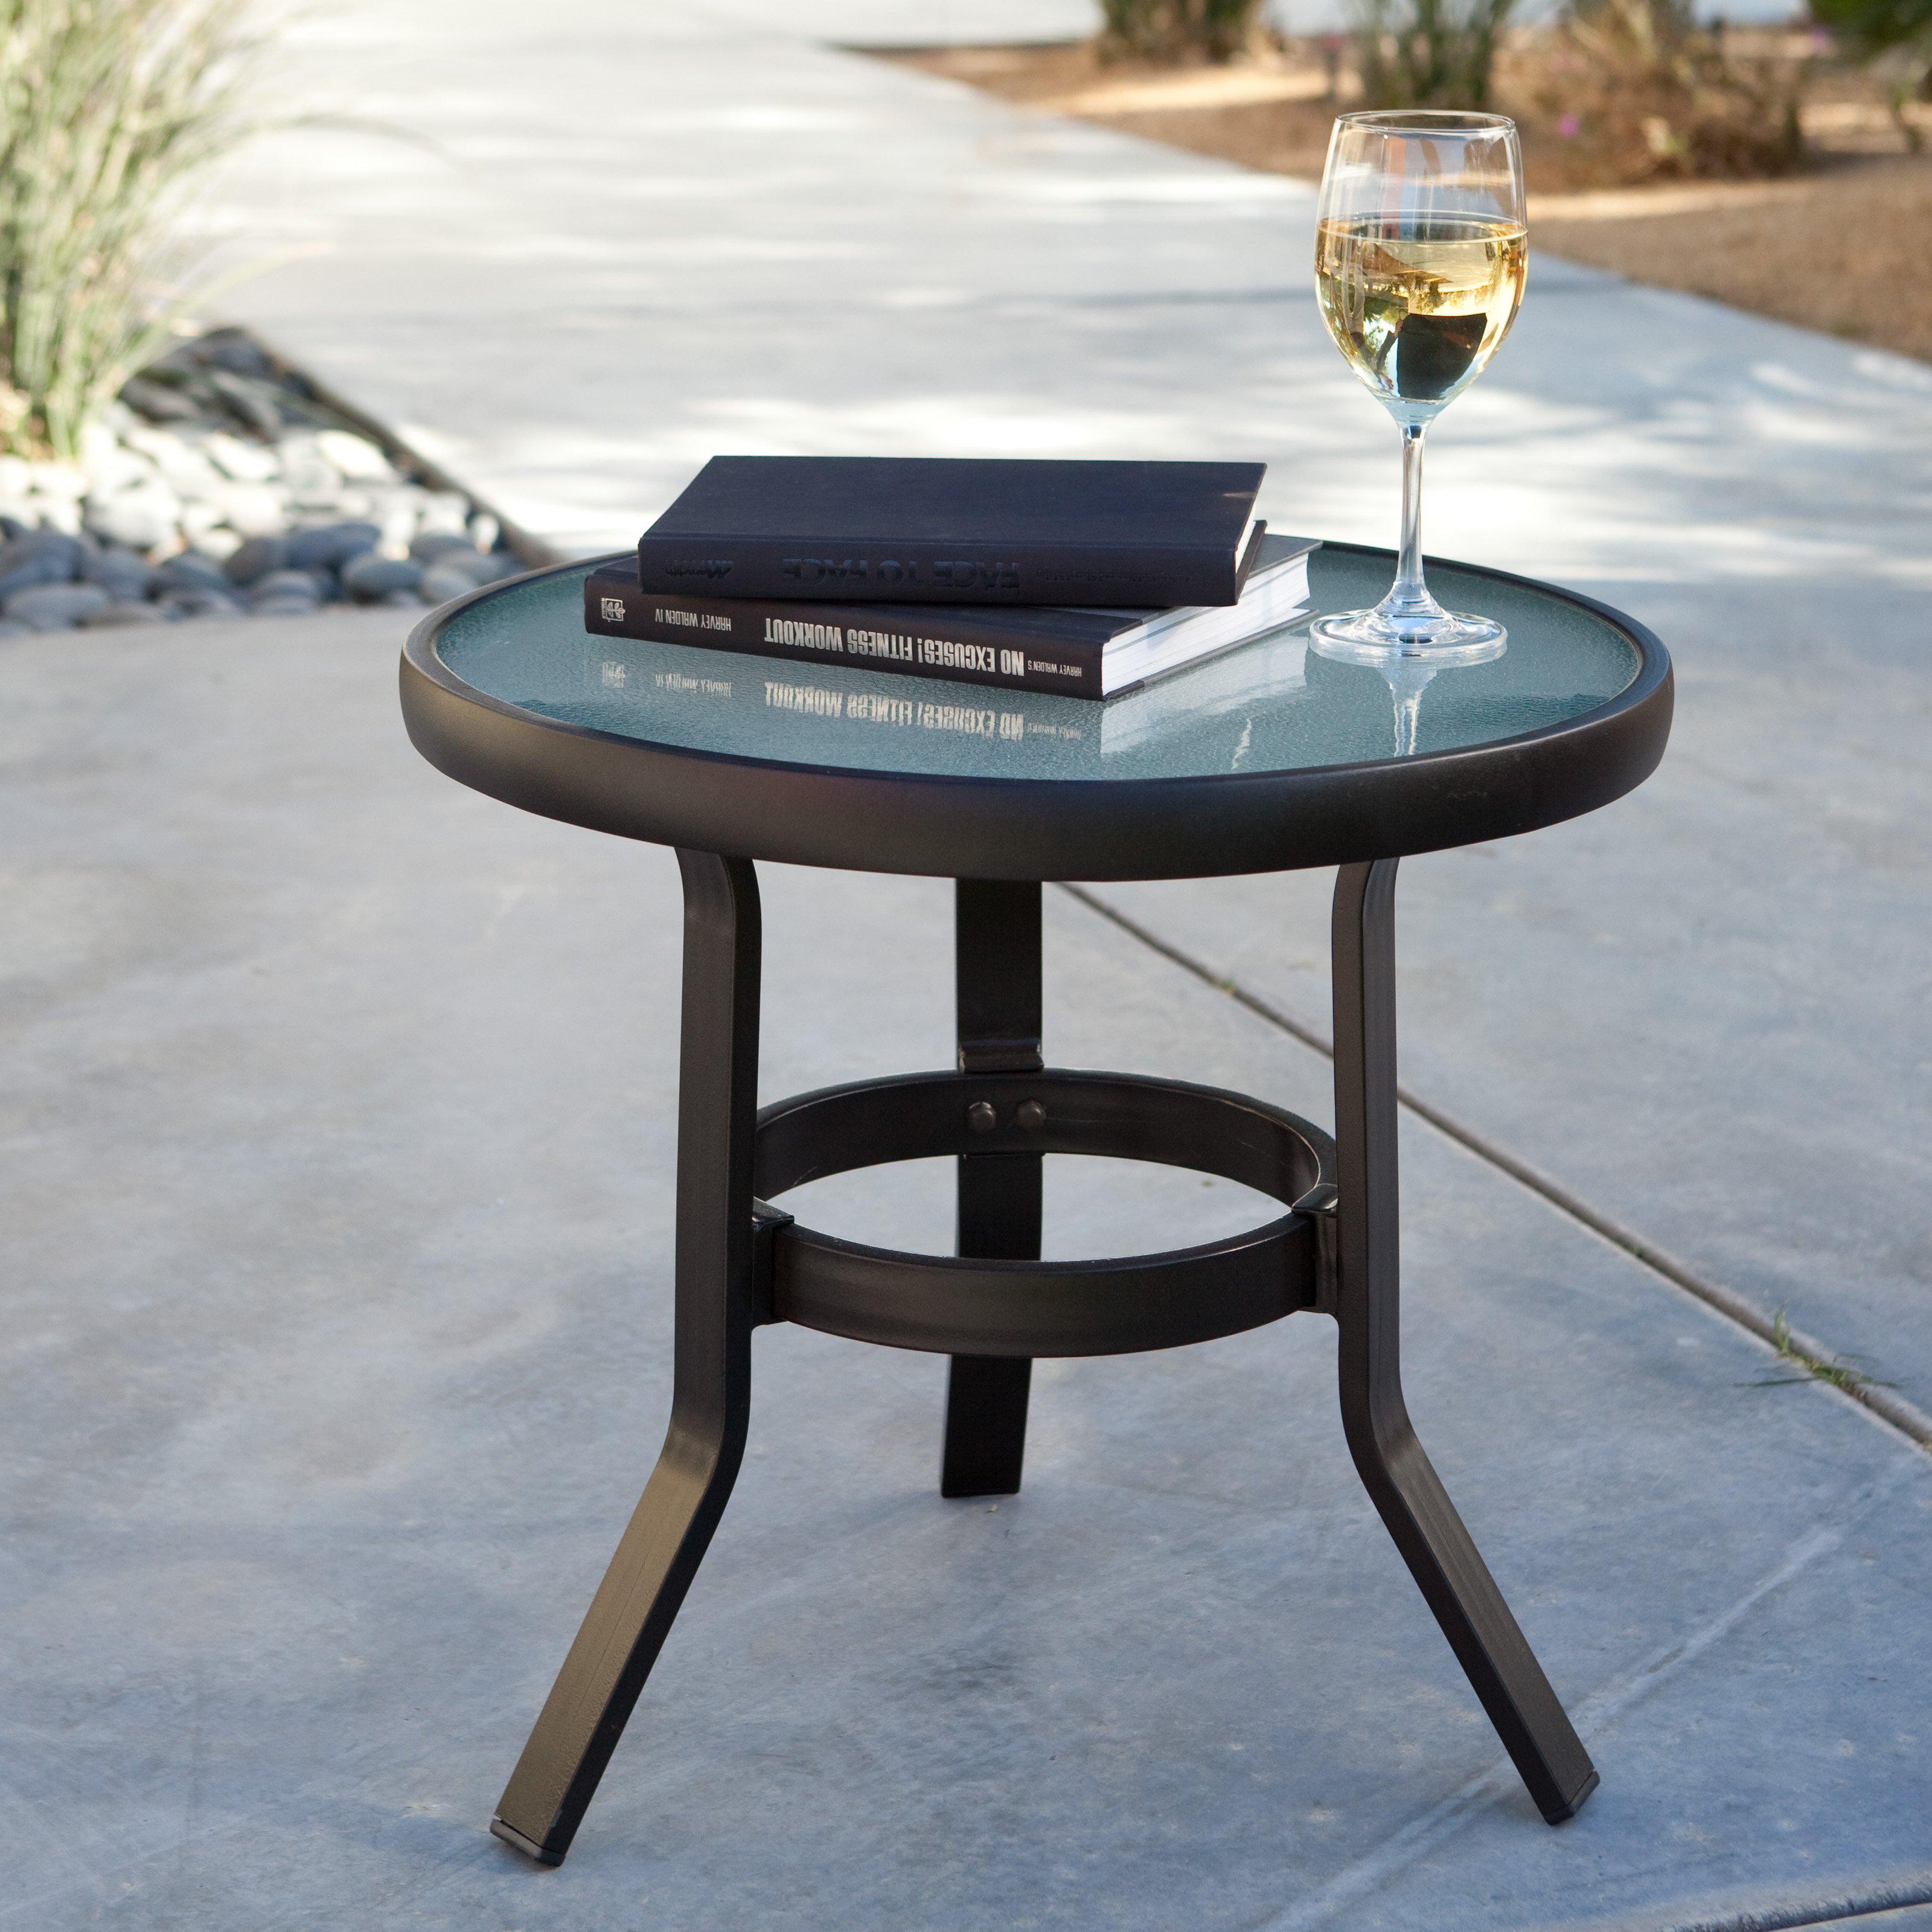 round patio side table outdoor front porch deck pool glass top end details tile ikea large coffee metal garden wicker set nice design tea mosaic and chairs industrial storage west